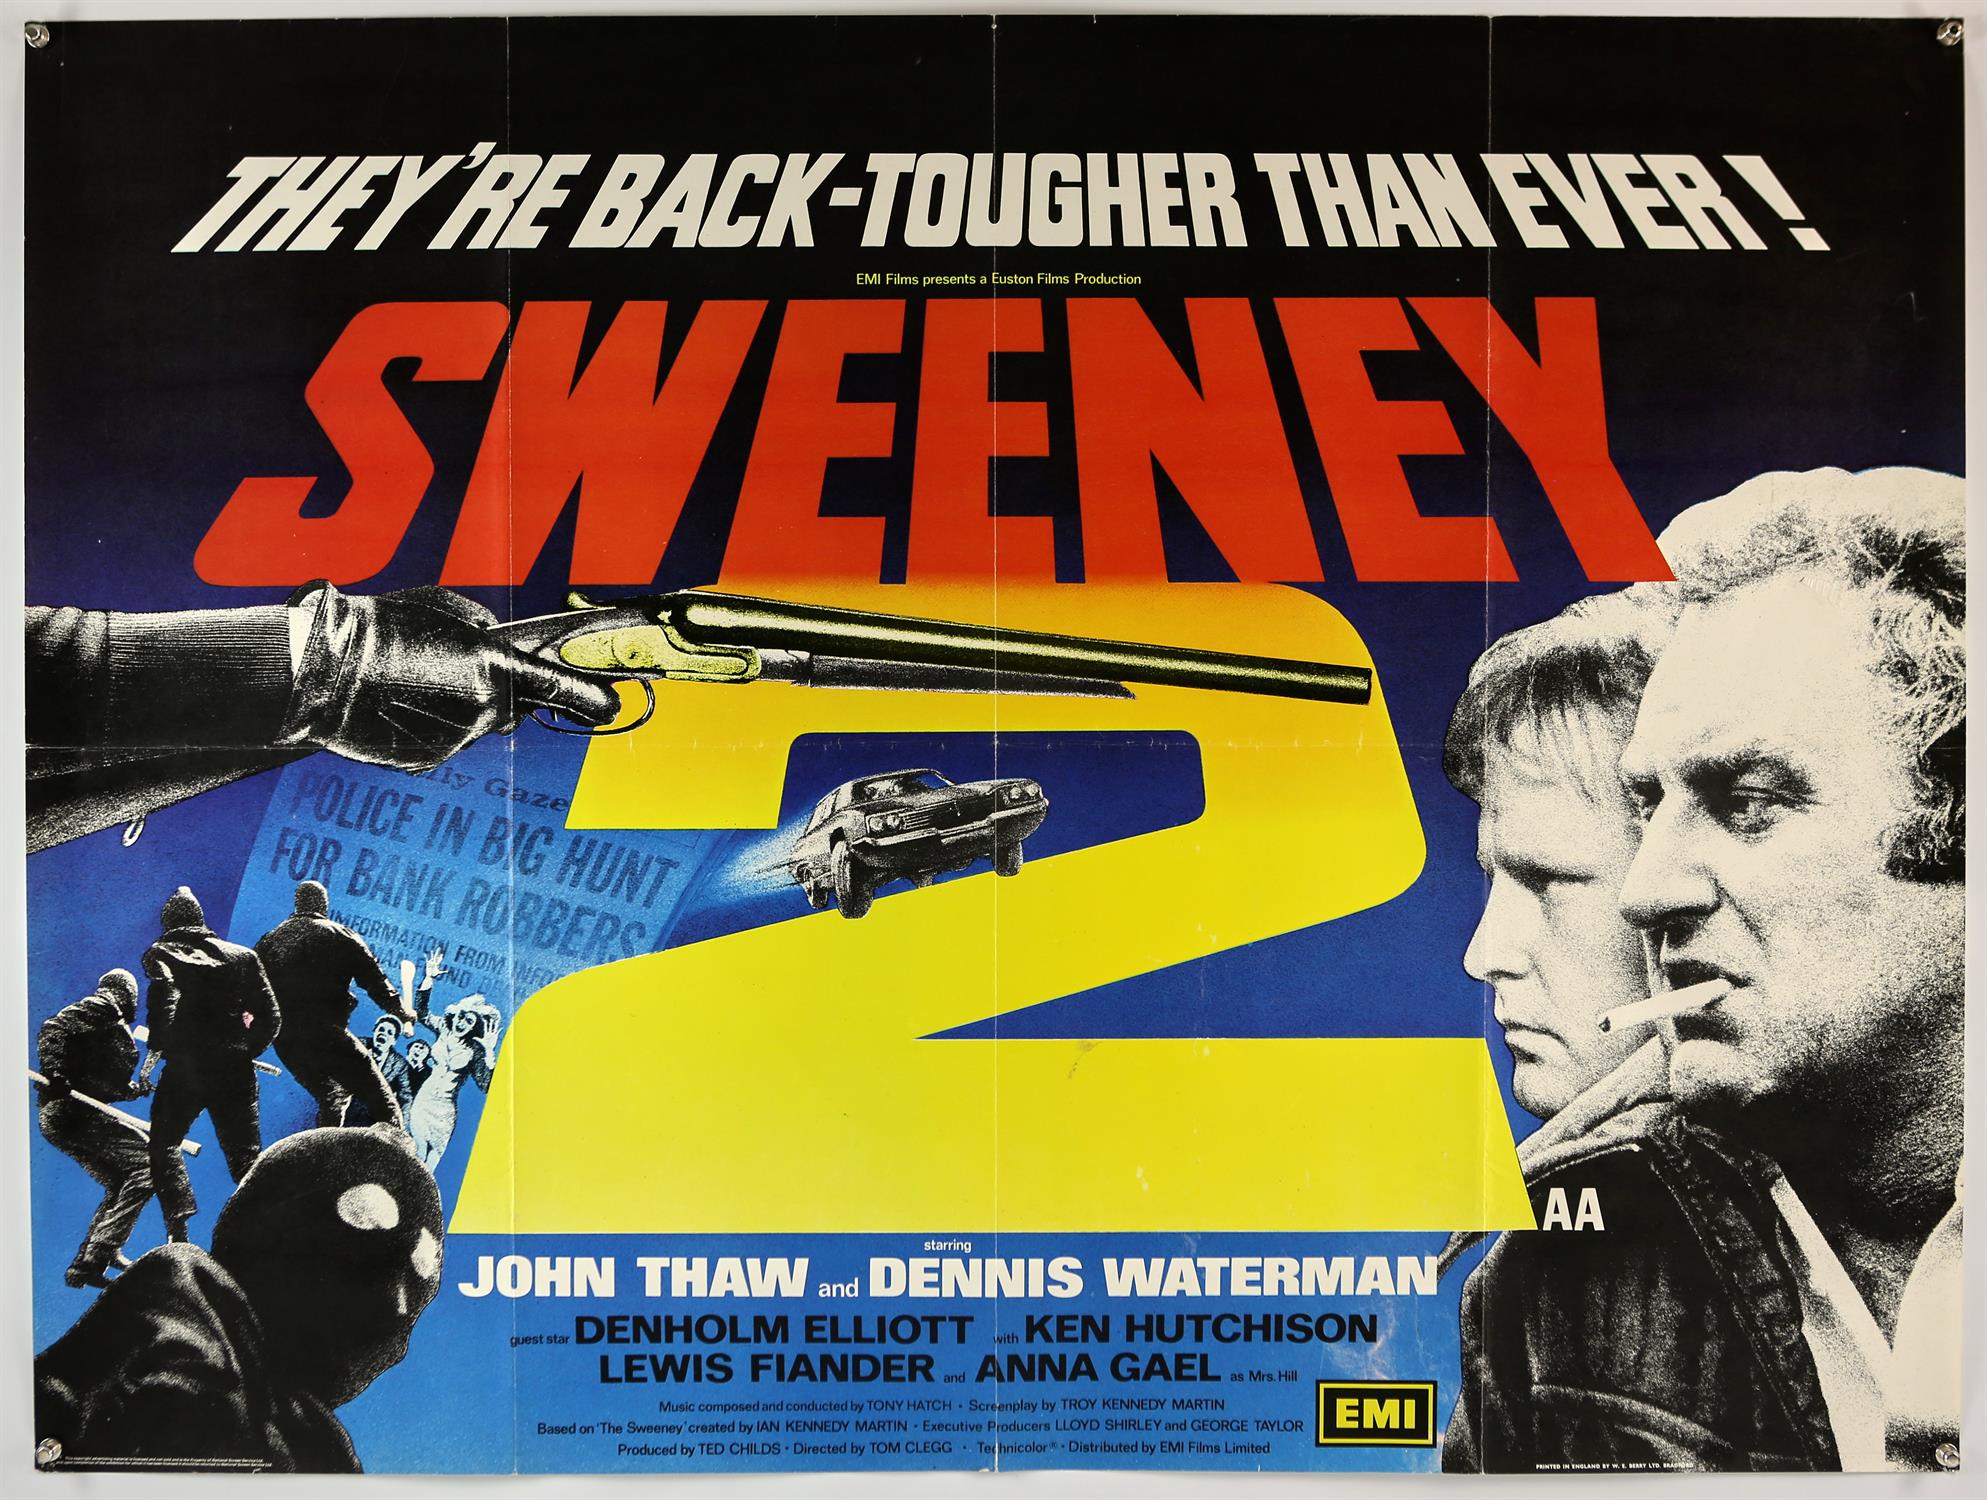 Sweeney 2 (1978) British Quad film poster, was folded now rolled, 30 x 40 inches Director Tom Clegg